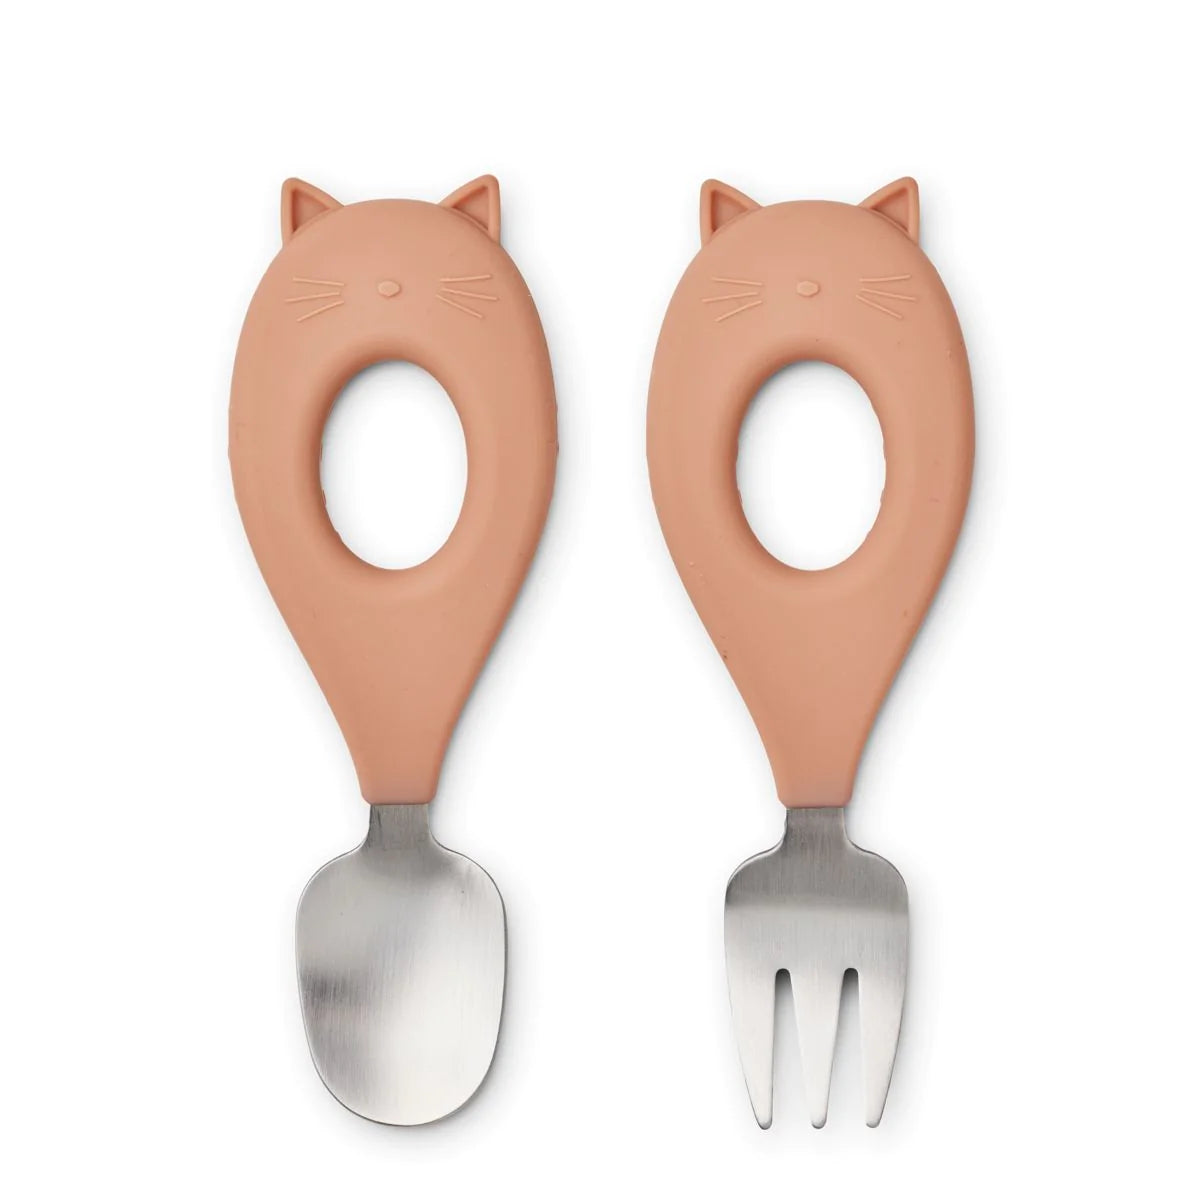 STANLEY BABY CUTLERY SET CAT - TUSCANY ROSE, LIEWOOD